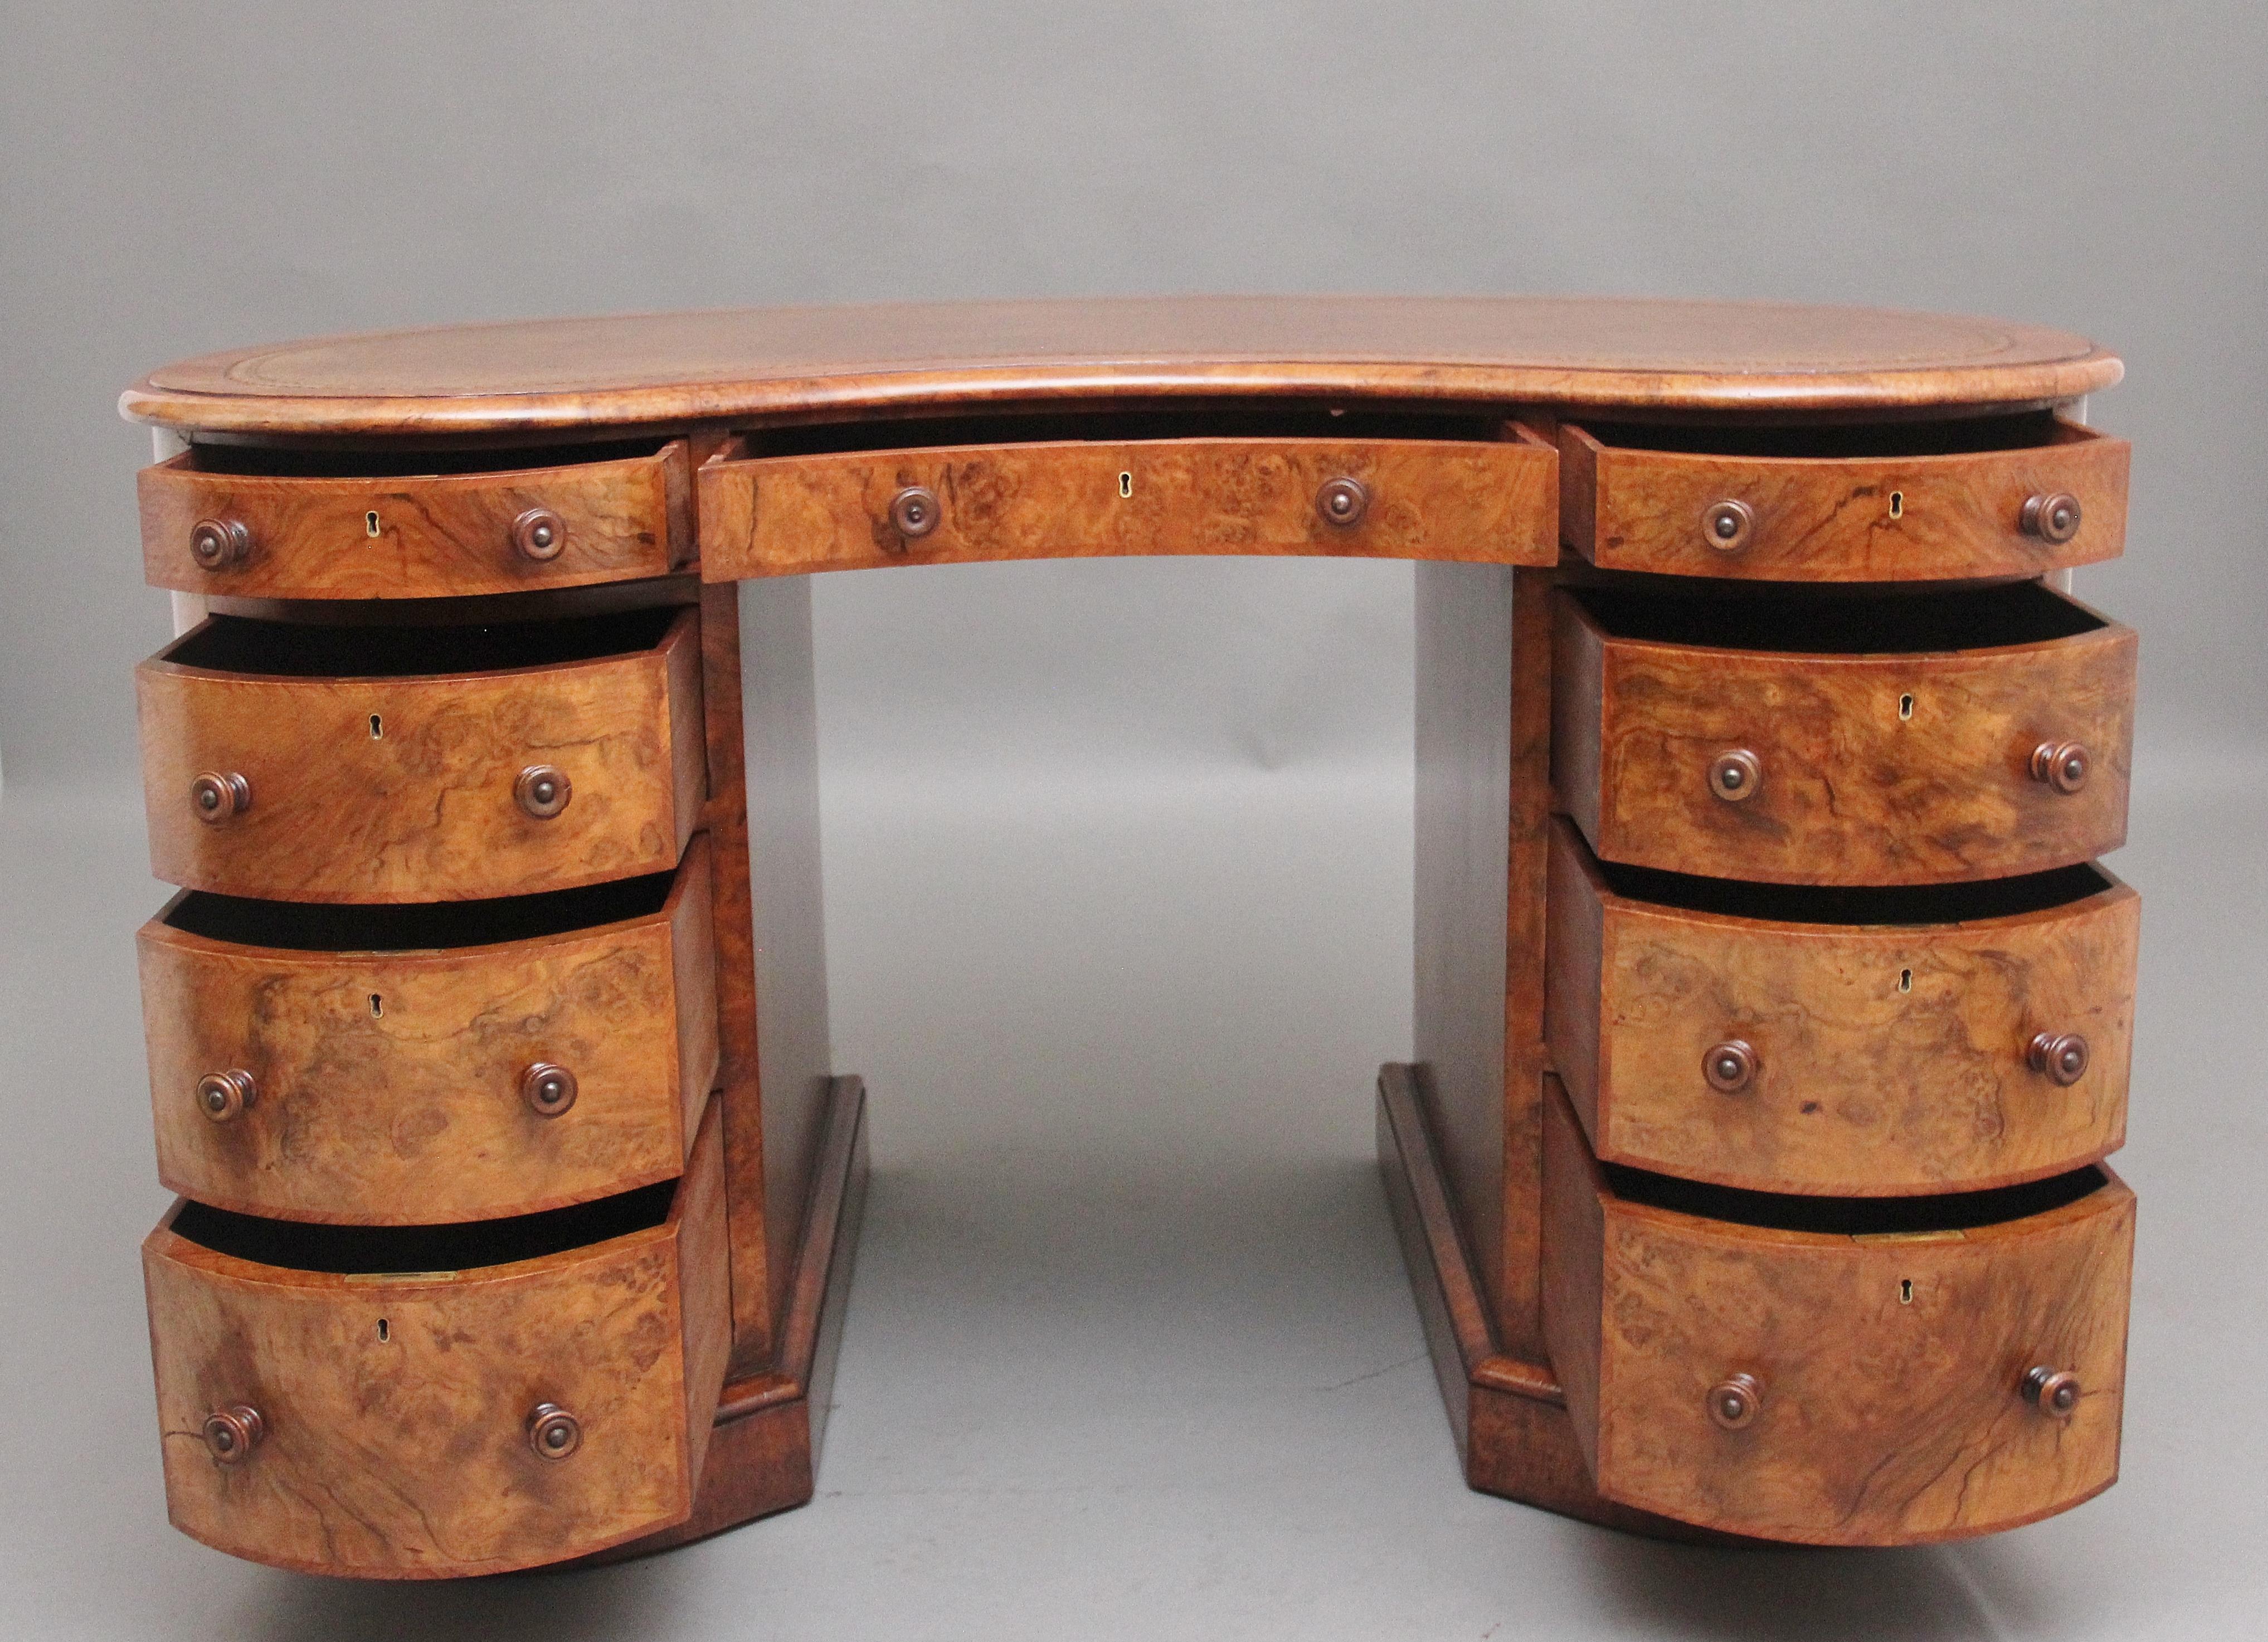 A freestanding 19th Century burr walnut pedestal kidney shaped desk of exceptional quality, the moulded edge top having a tan brown leather writing surface decorated with gilt tooling, the front of the desk having an arrangement of nine graduated,